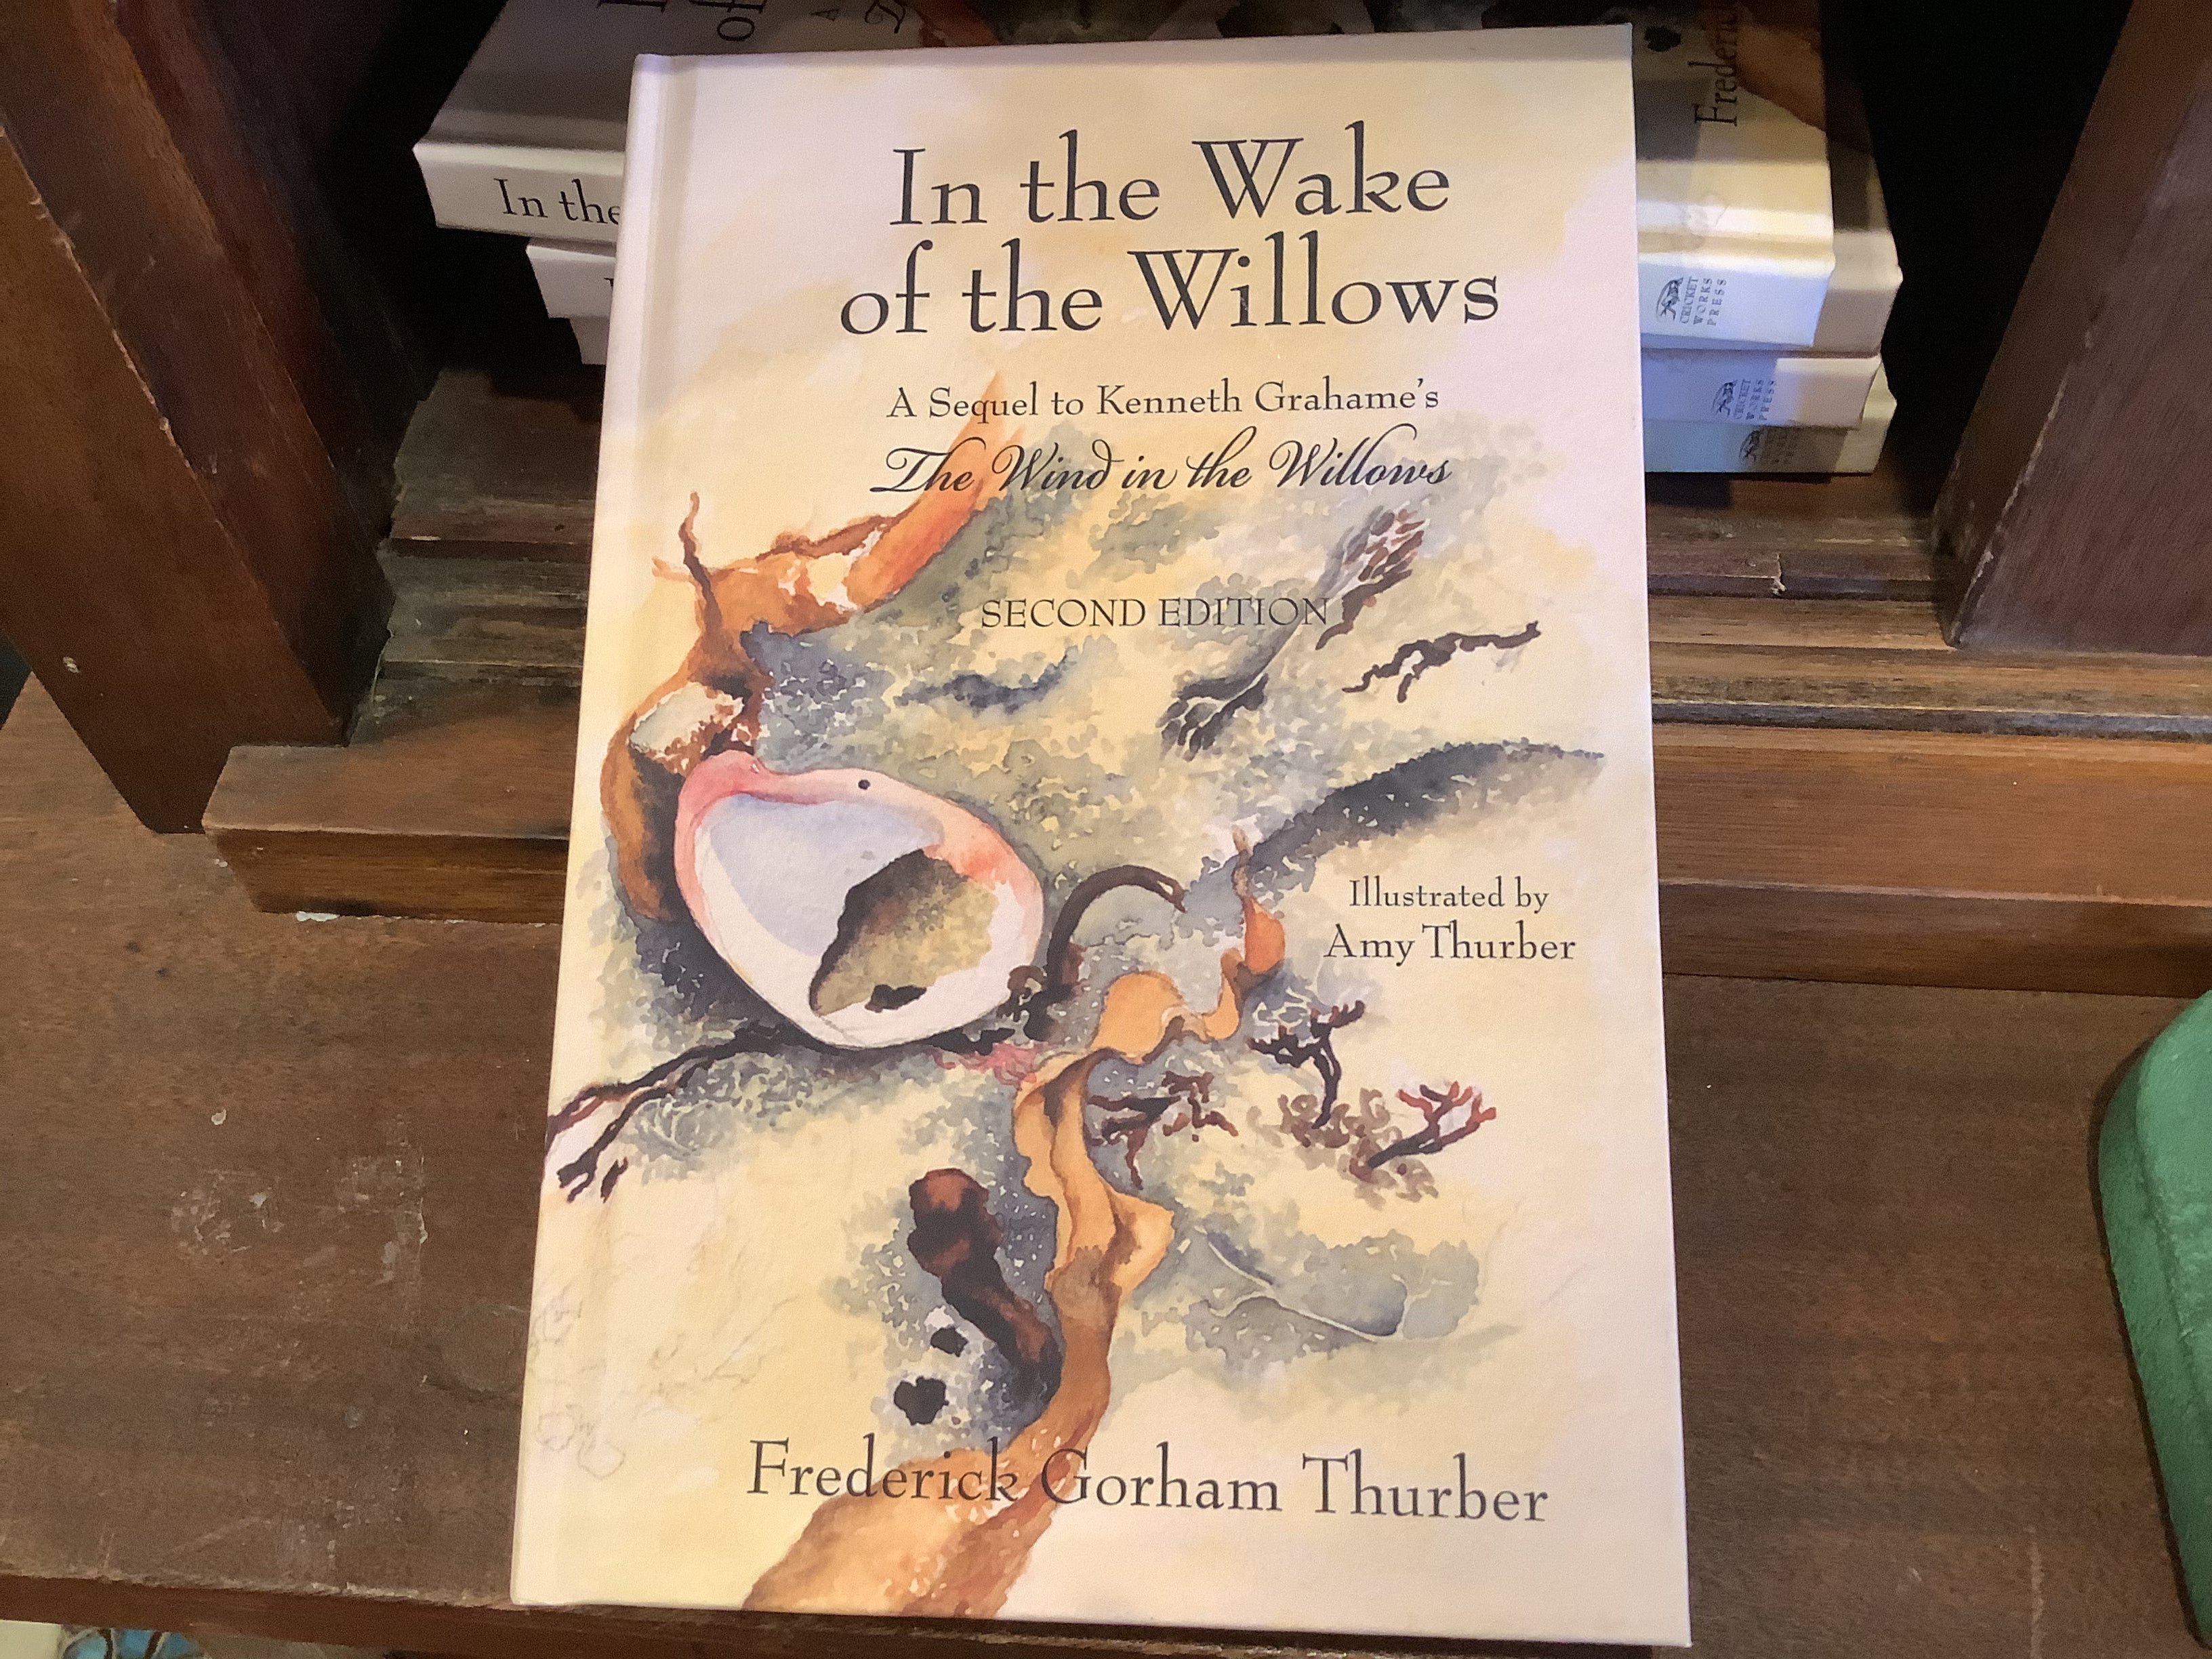 In the Wake of the Willows, by Frederick Gorham Thurber